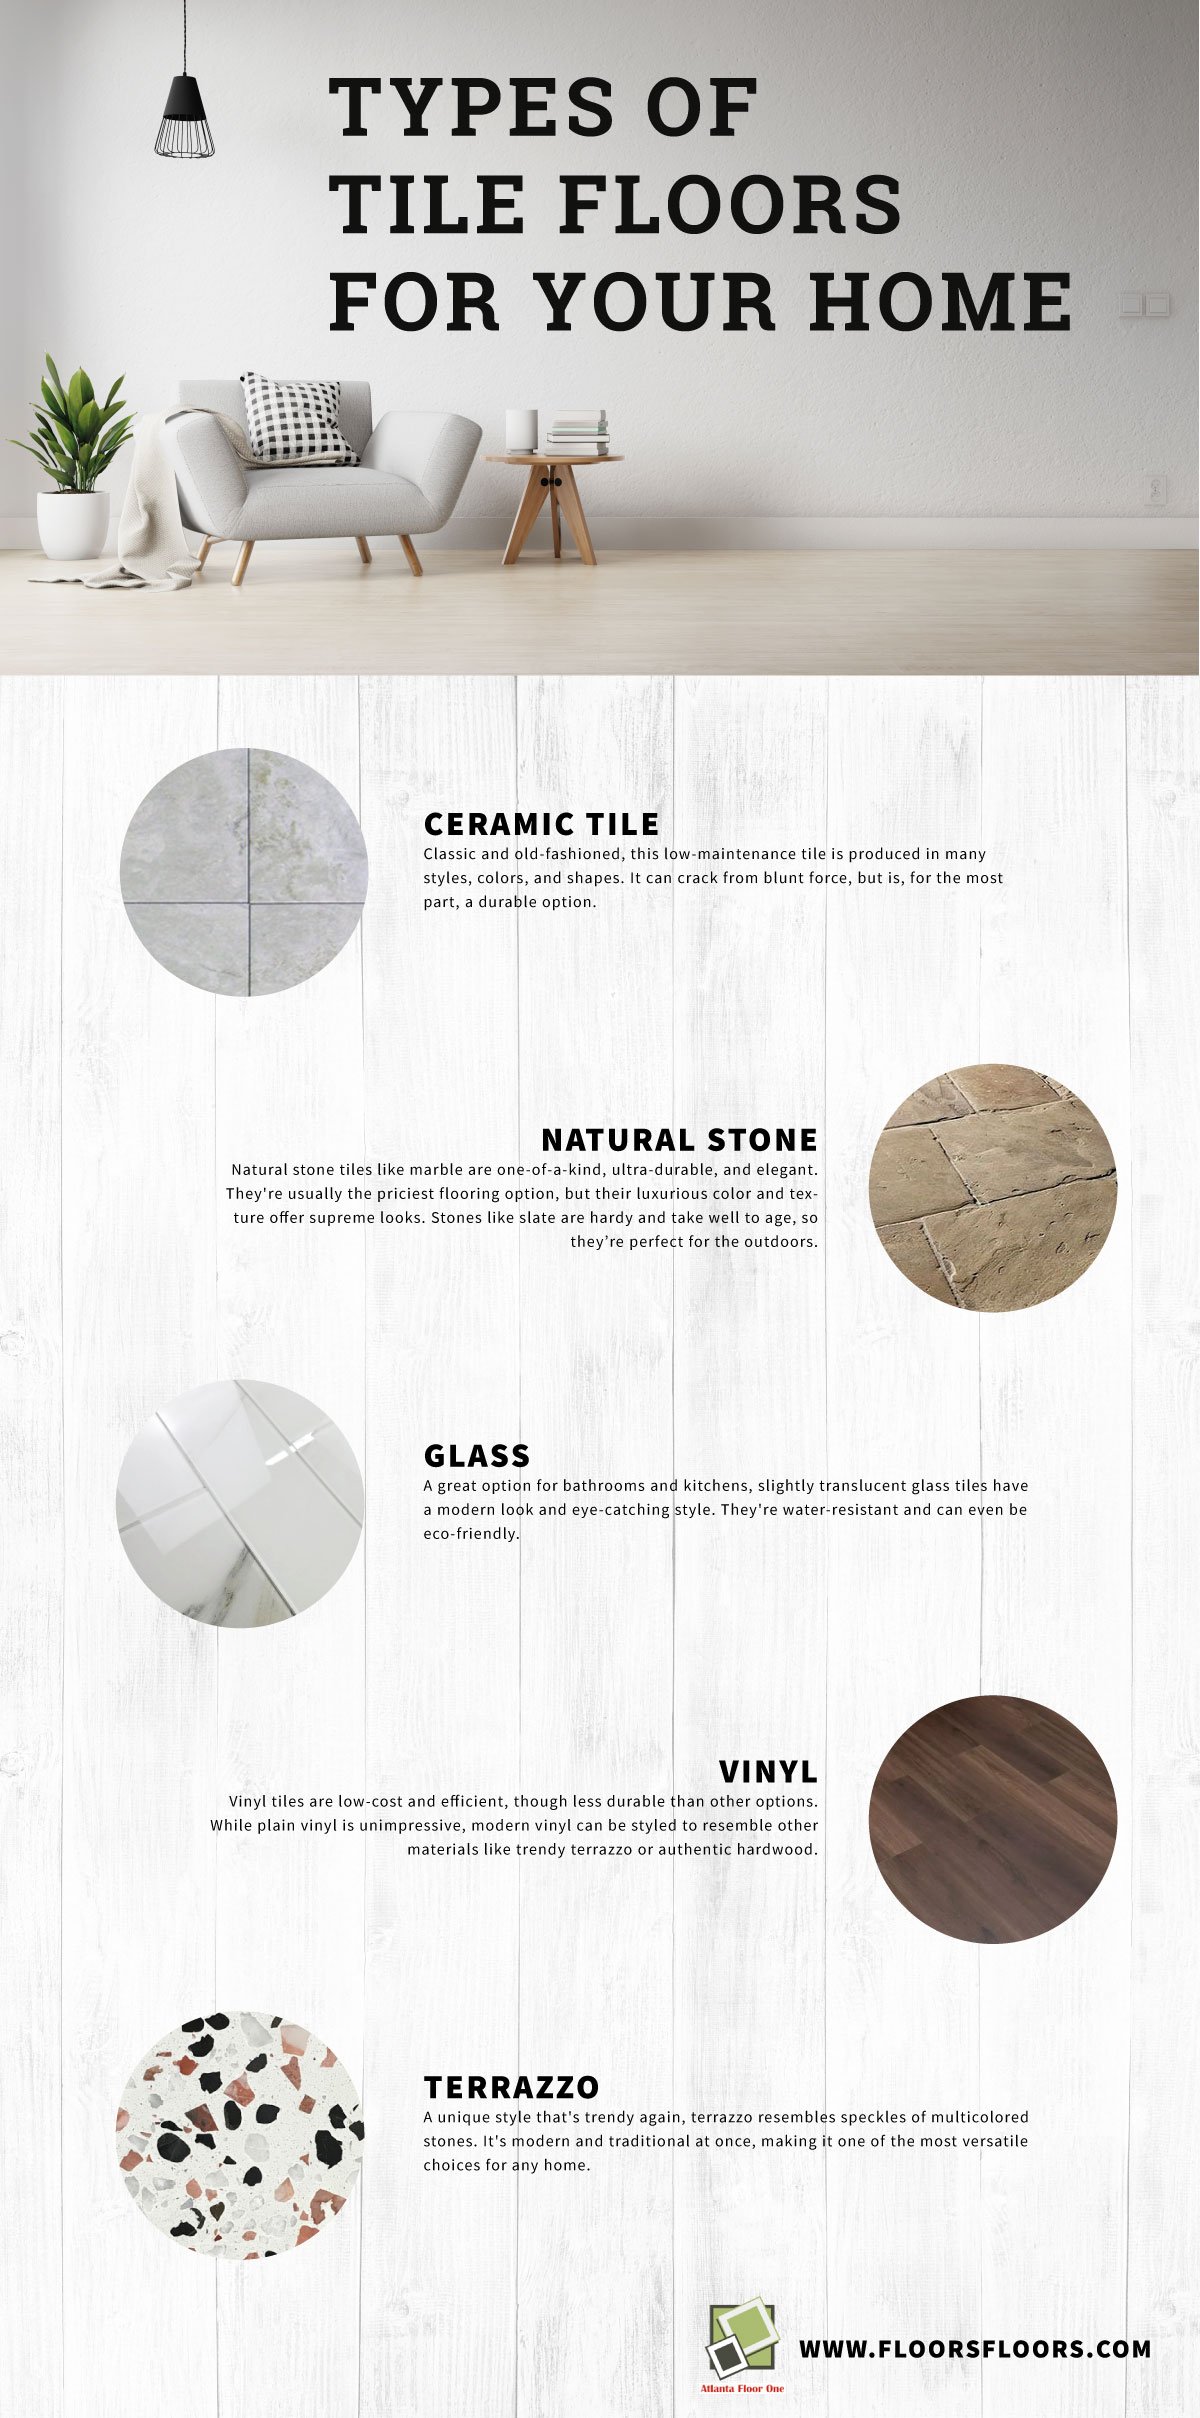 Types of Tile Floors for Your Home